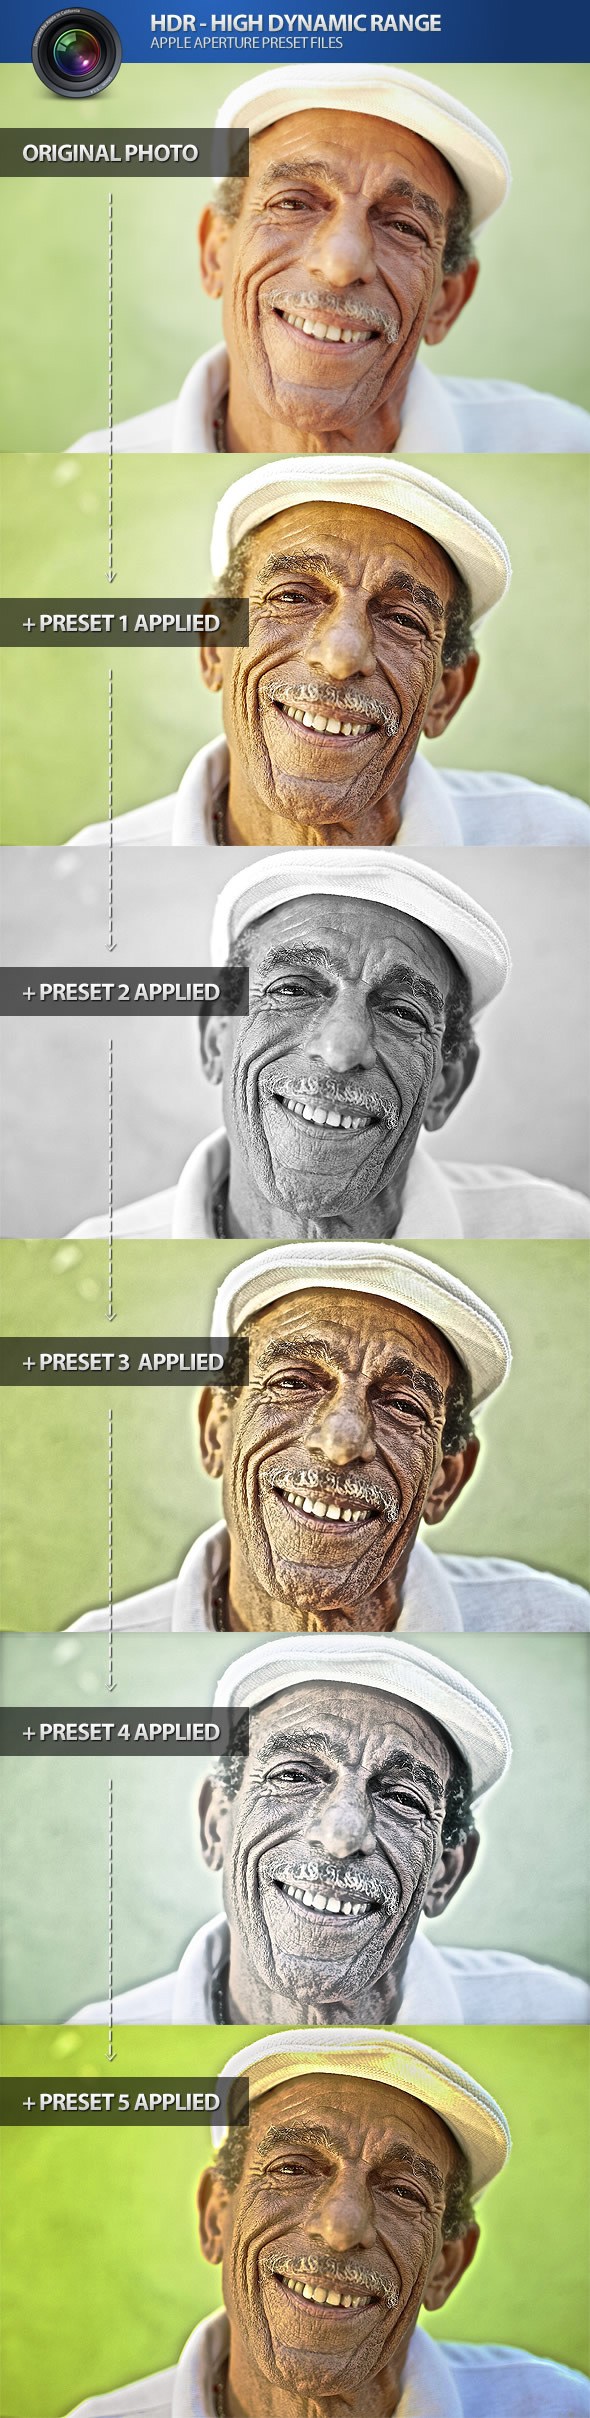 HDR High Dynamic Range Aperture Photo Presets by scottwills